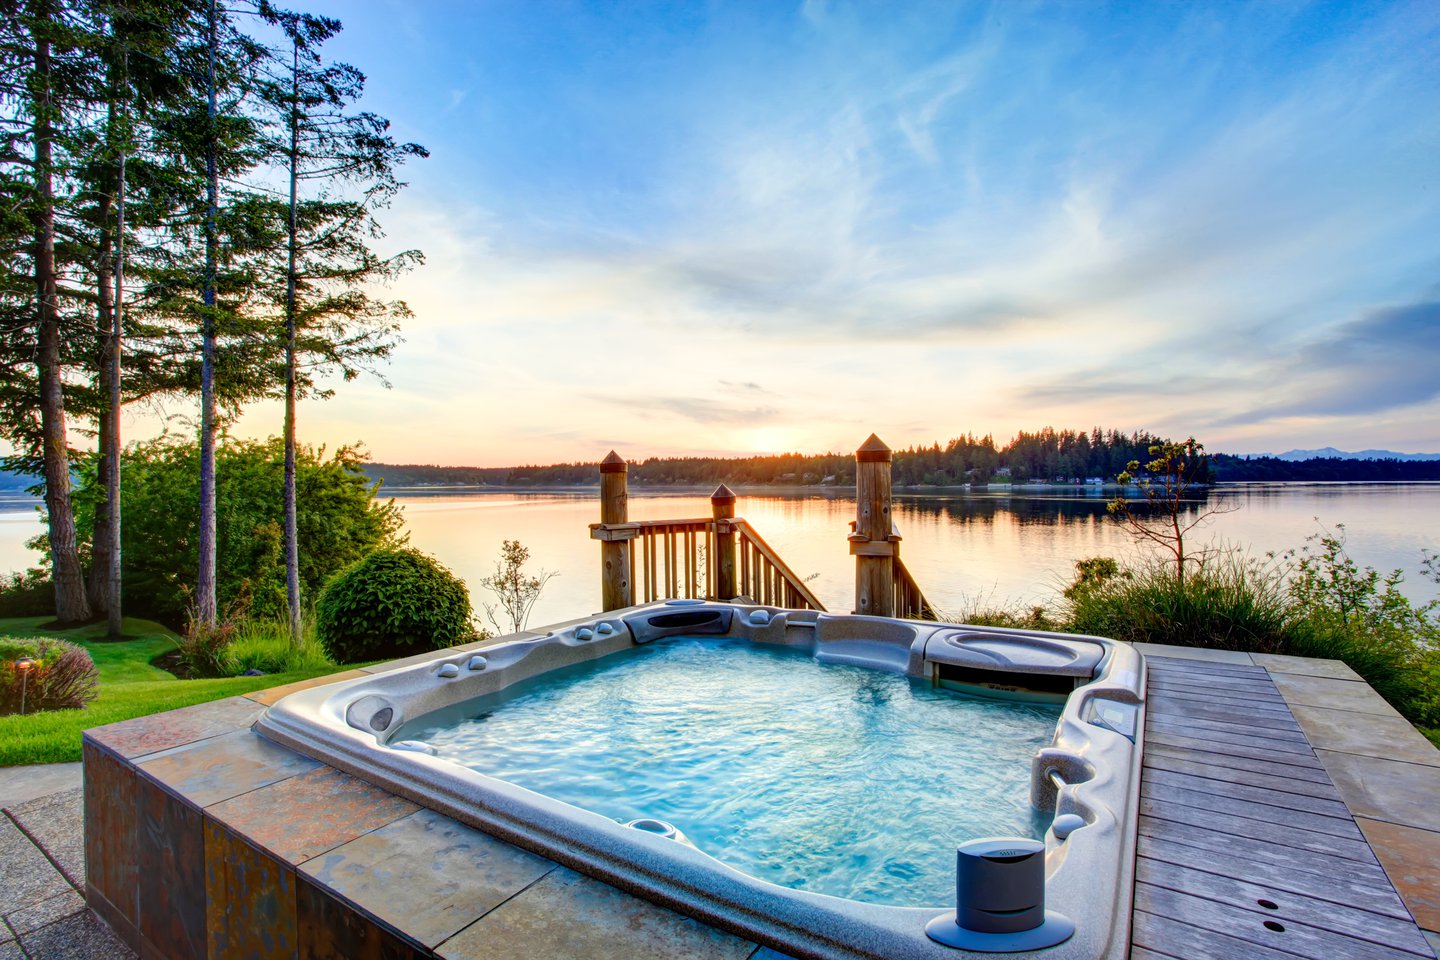 Should You Get an Outdoor Hot Tub? Millionacres